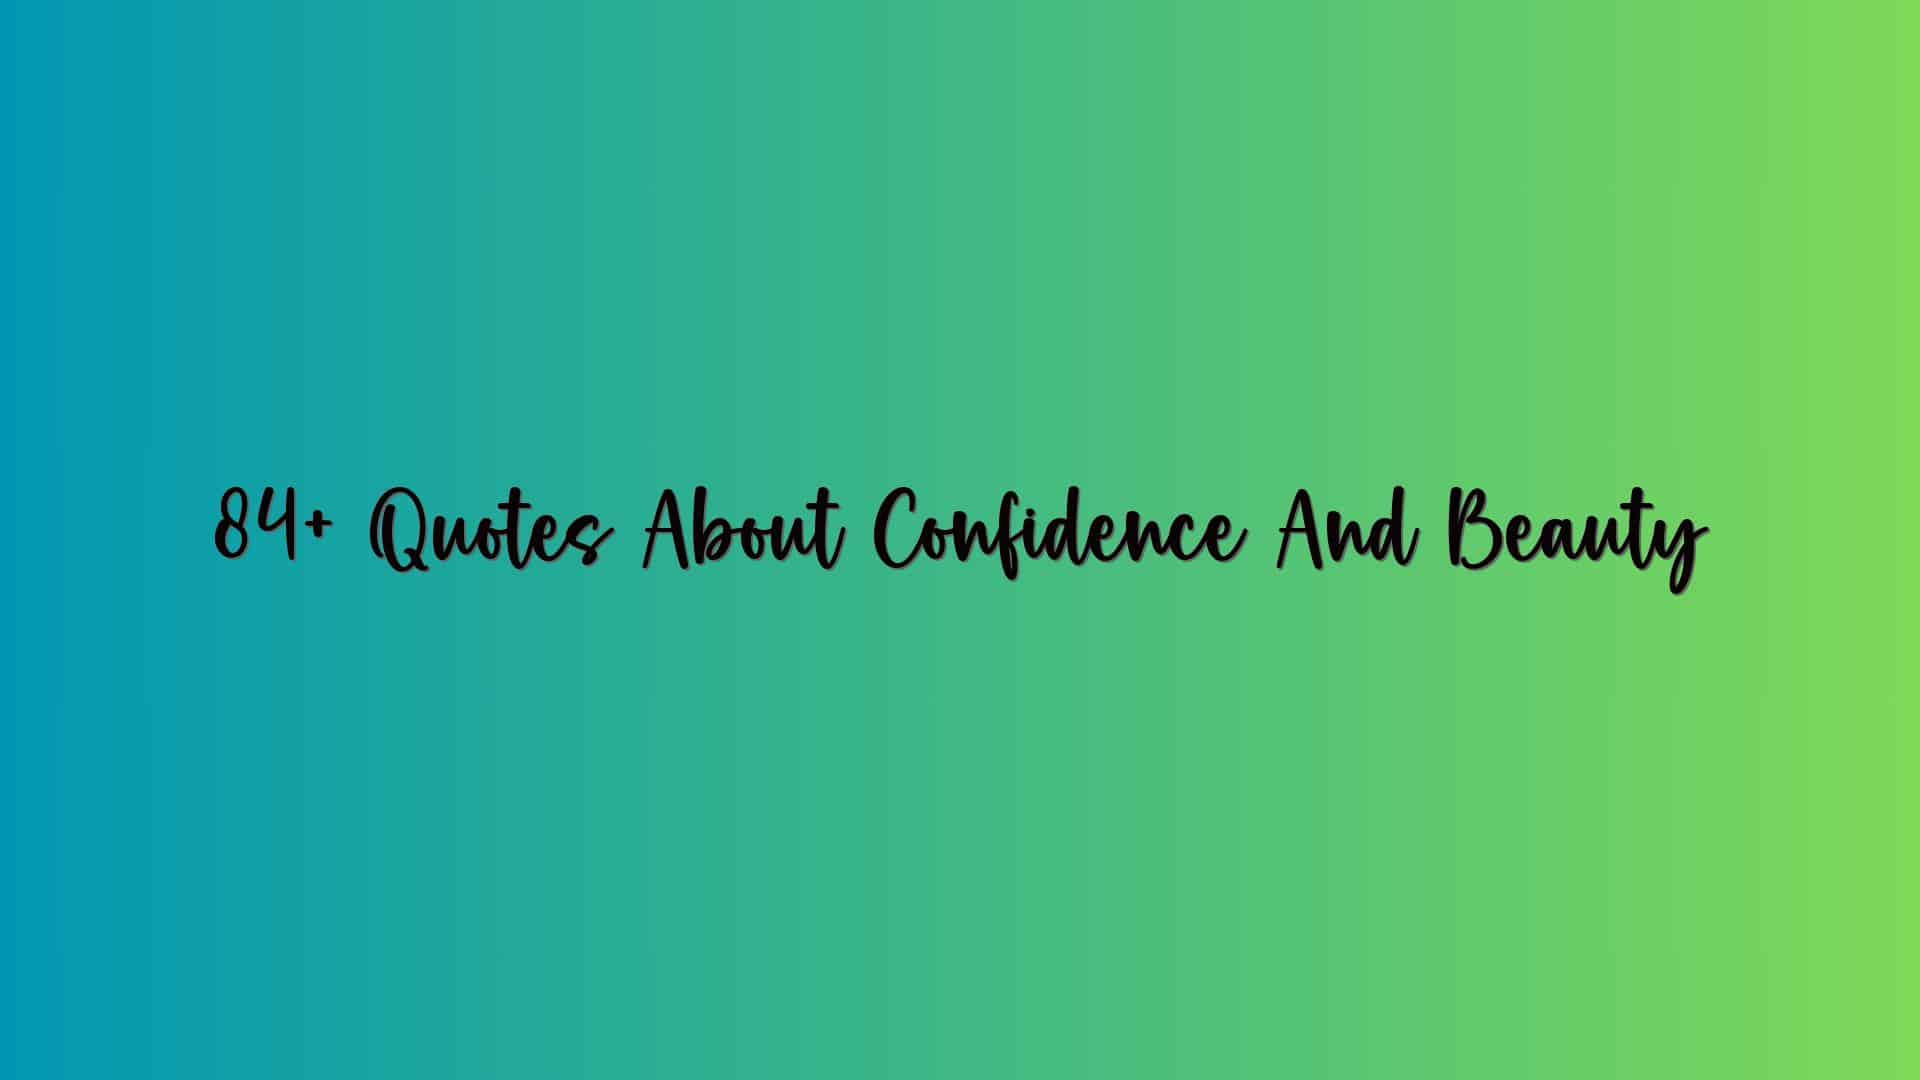 84+ Quotes About Confidence And Beauty